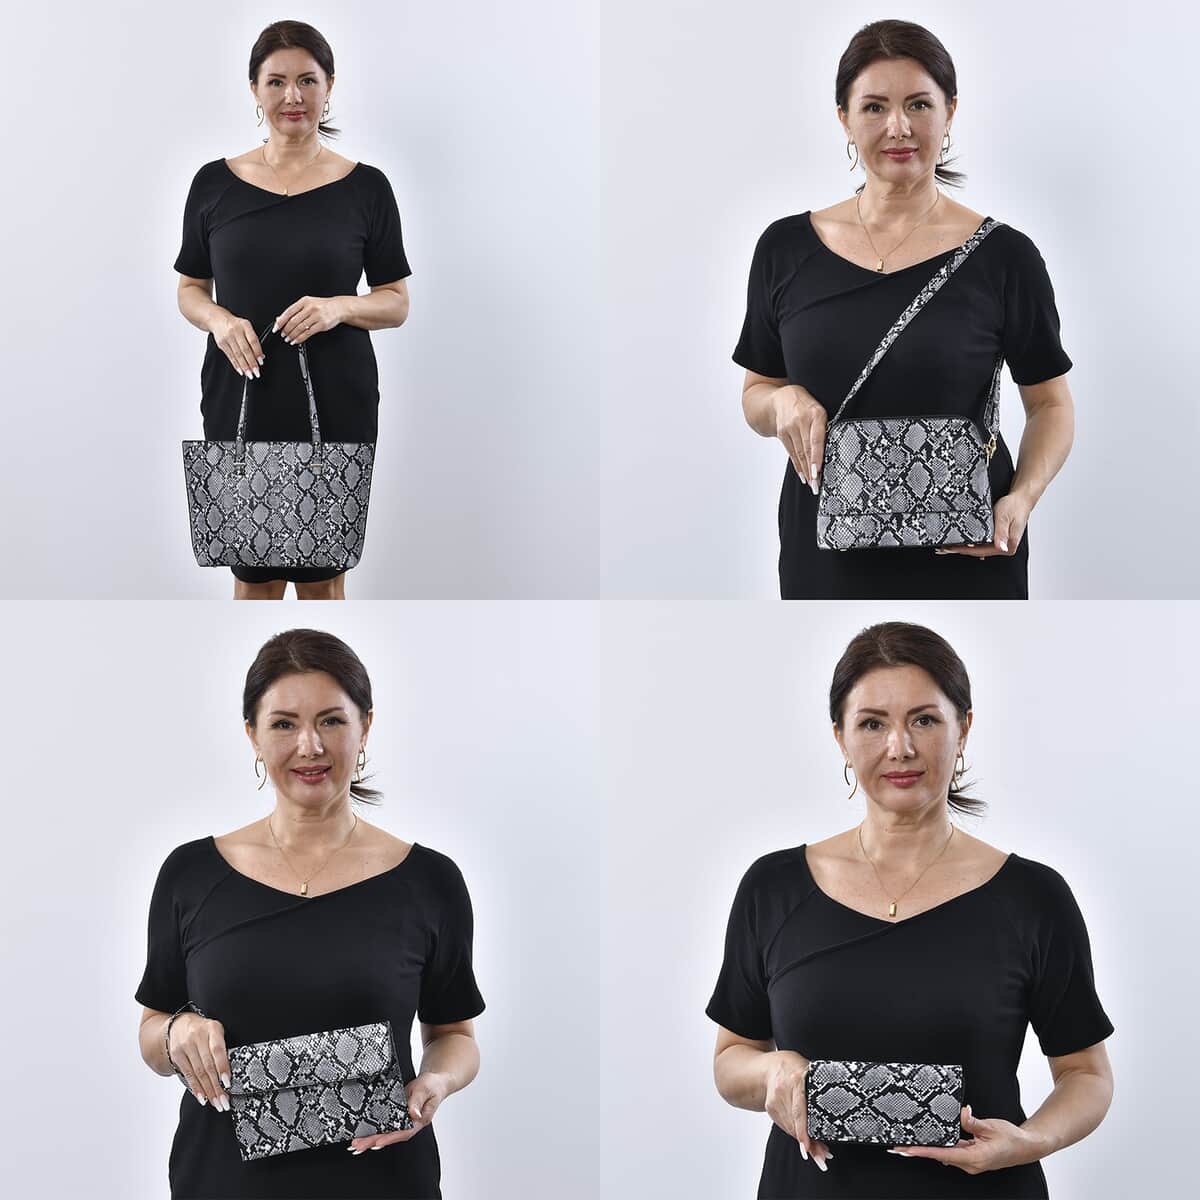 PASSAGE Black Snake Skin Pattern Faux Leather Totebag (13"x4"x10.5"), Crossbody Bag (10.24"x3.15"x7.5"), Clutch Bag (9.84"x6.3") and Wallet (7.87"x4") image number 1